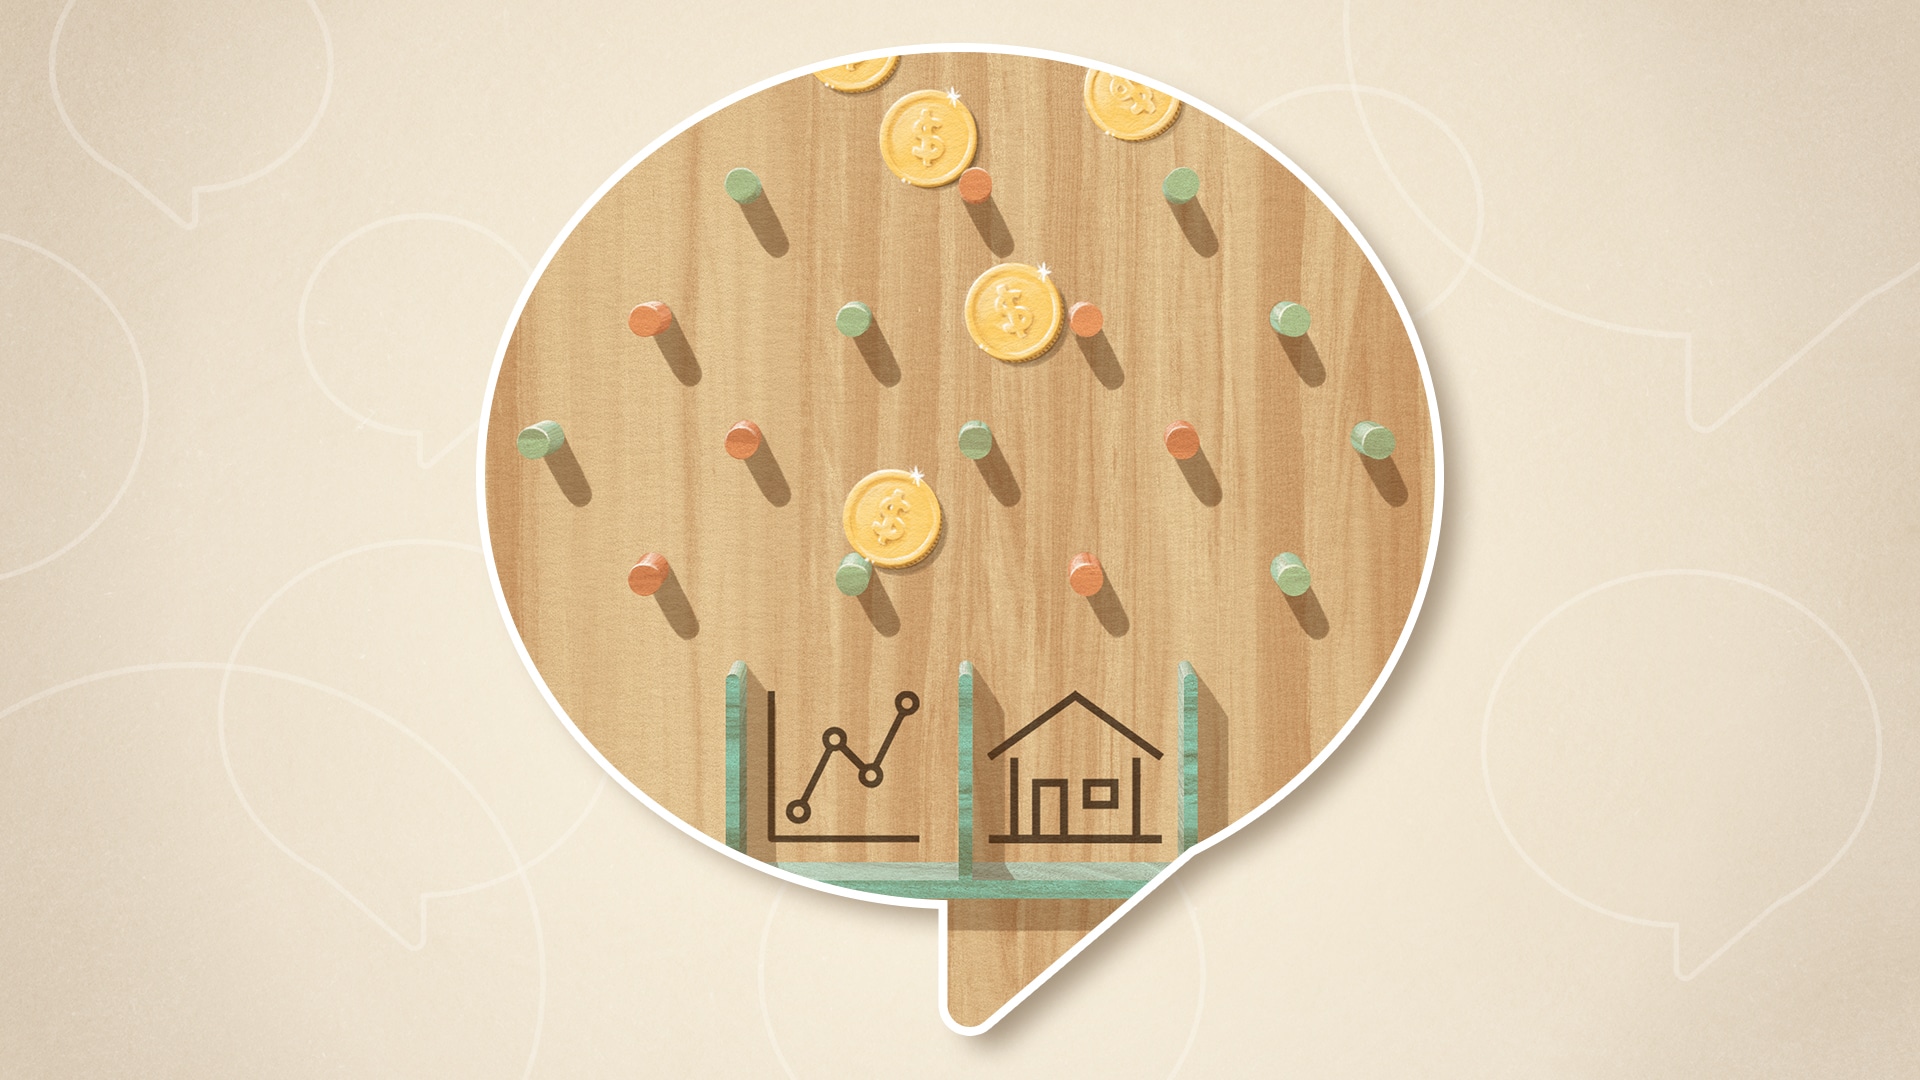 Illustration of a Plinko game, where coins are falling and hitting pegs, and the buckets at the bottom display symbols of a stock market graph and a house.